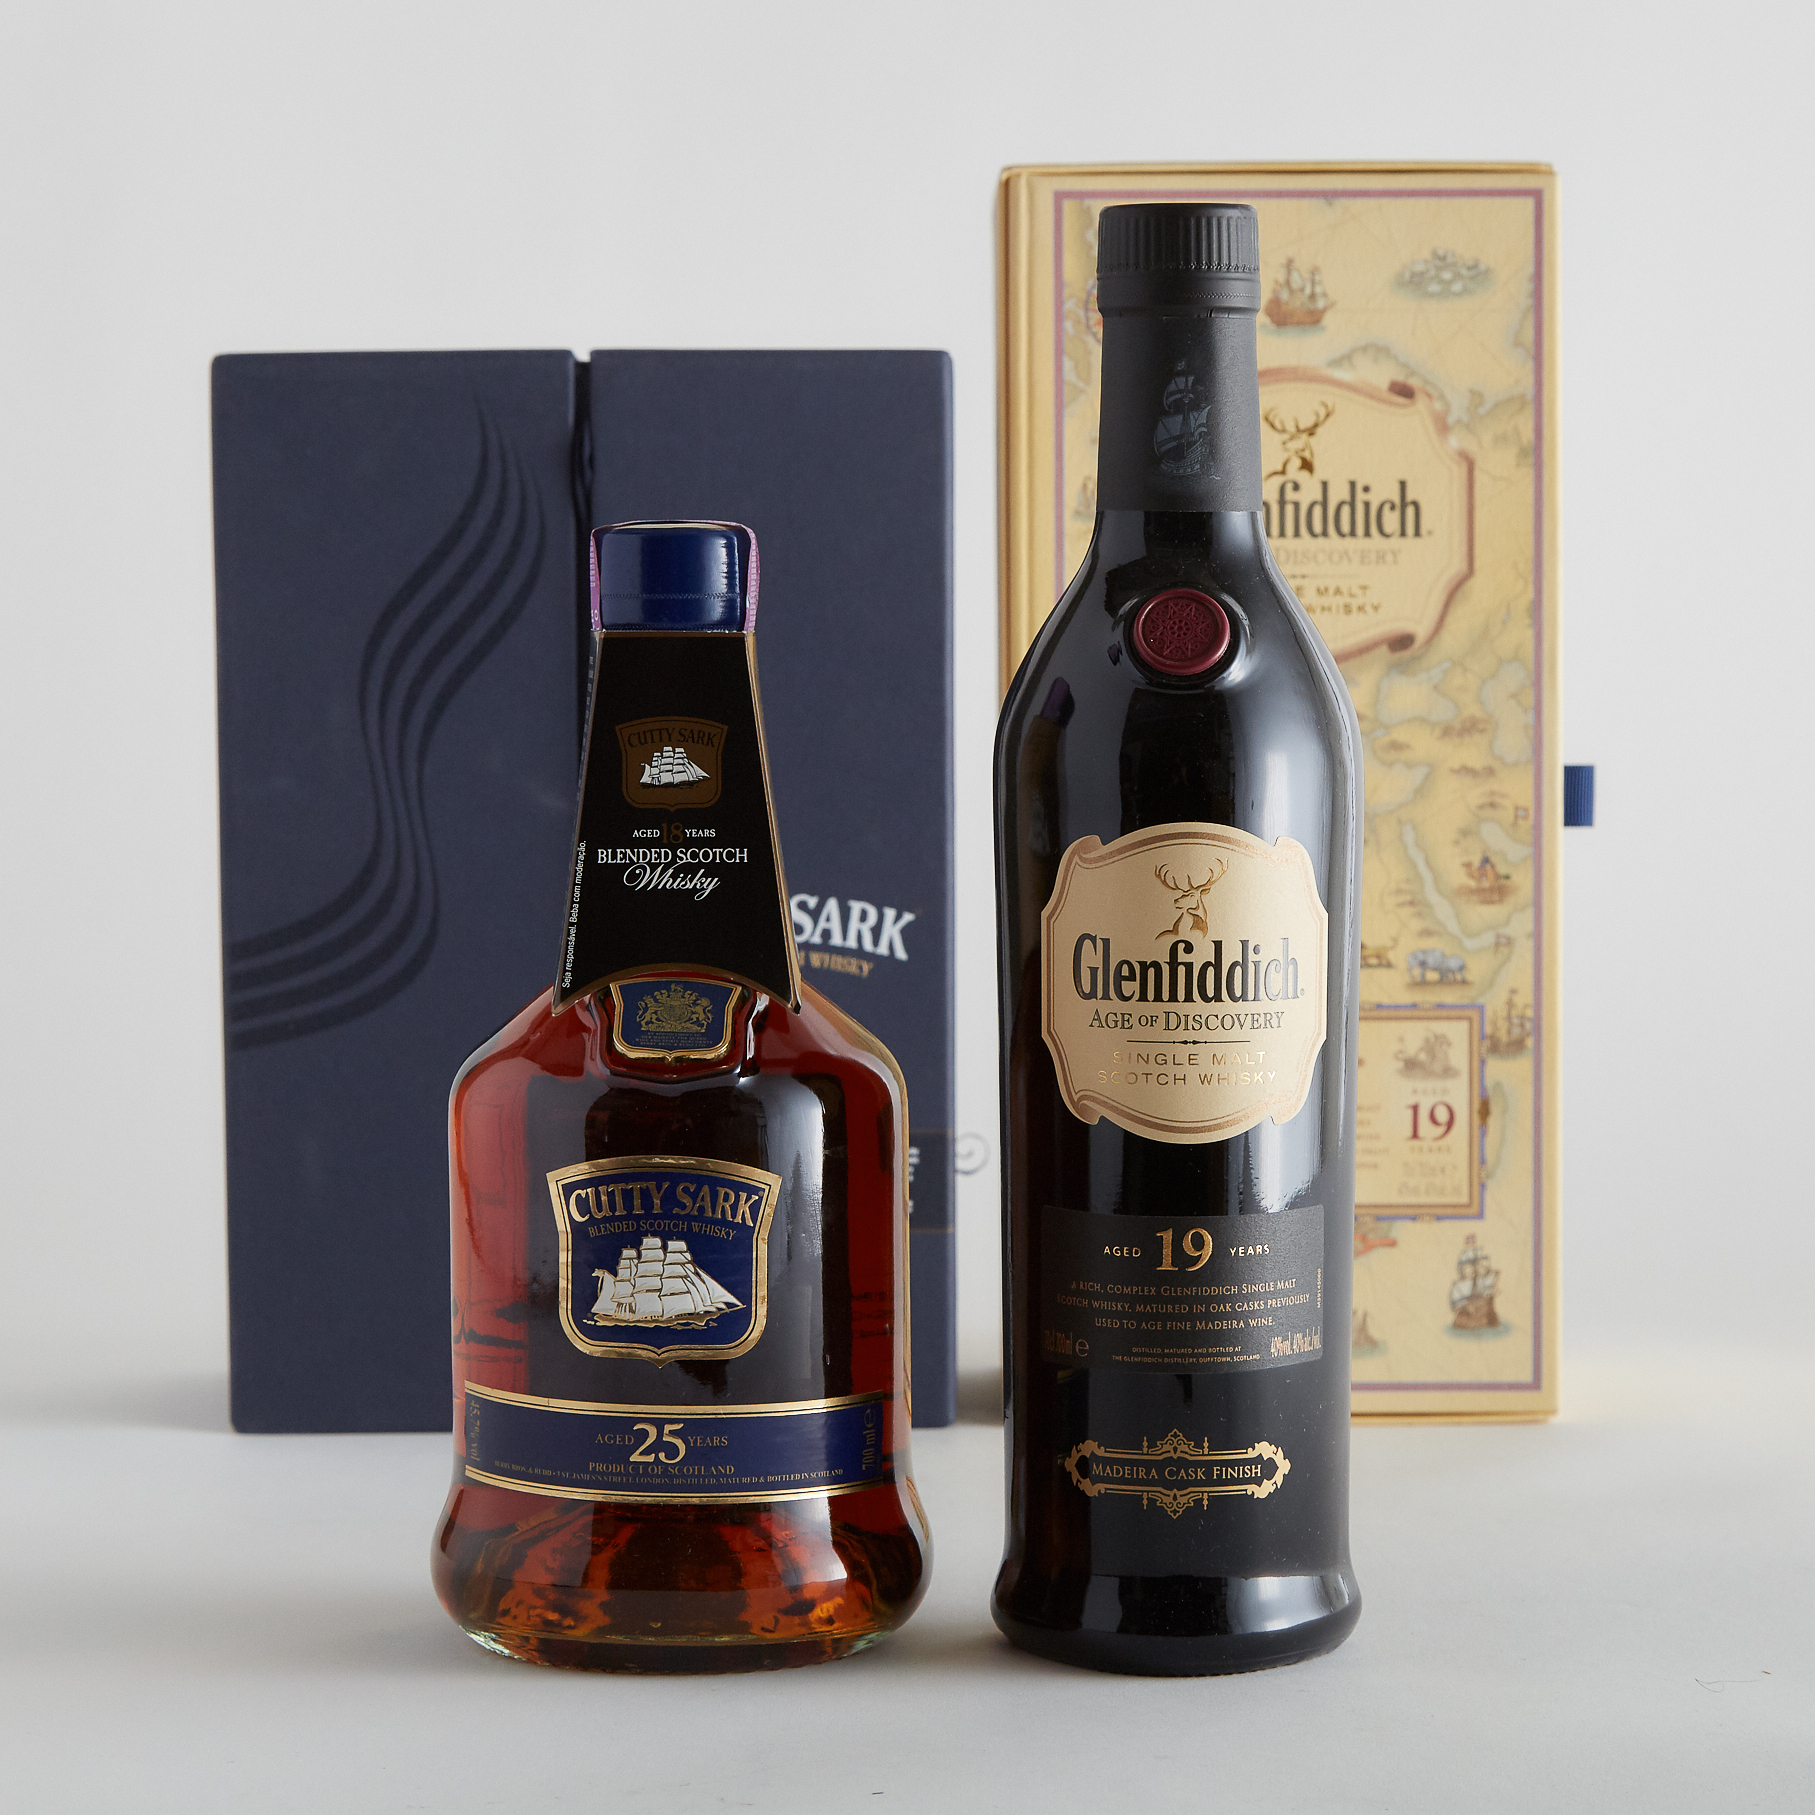 CUTTY SARK BLENDED SCOTCH WHISKY 25 YEARS (ONE 700 ML)
GLENFIDDICH SINGLE MALT SCOTCH WHISKY 19 YEARS (ONE 700 ML)